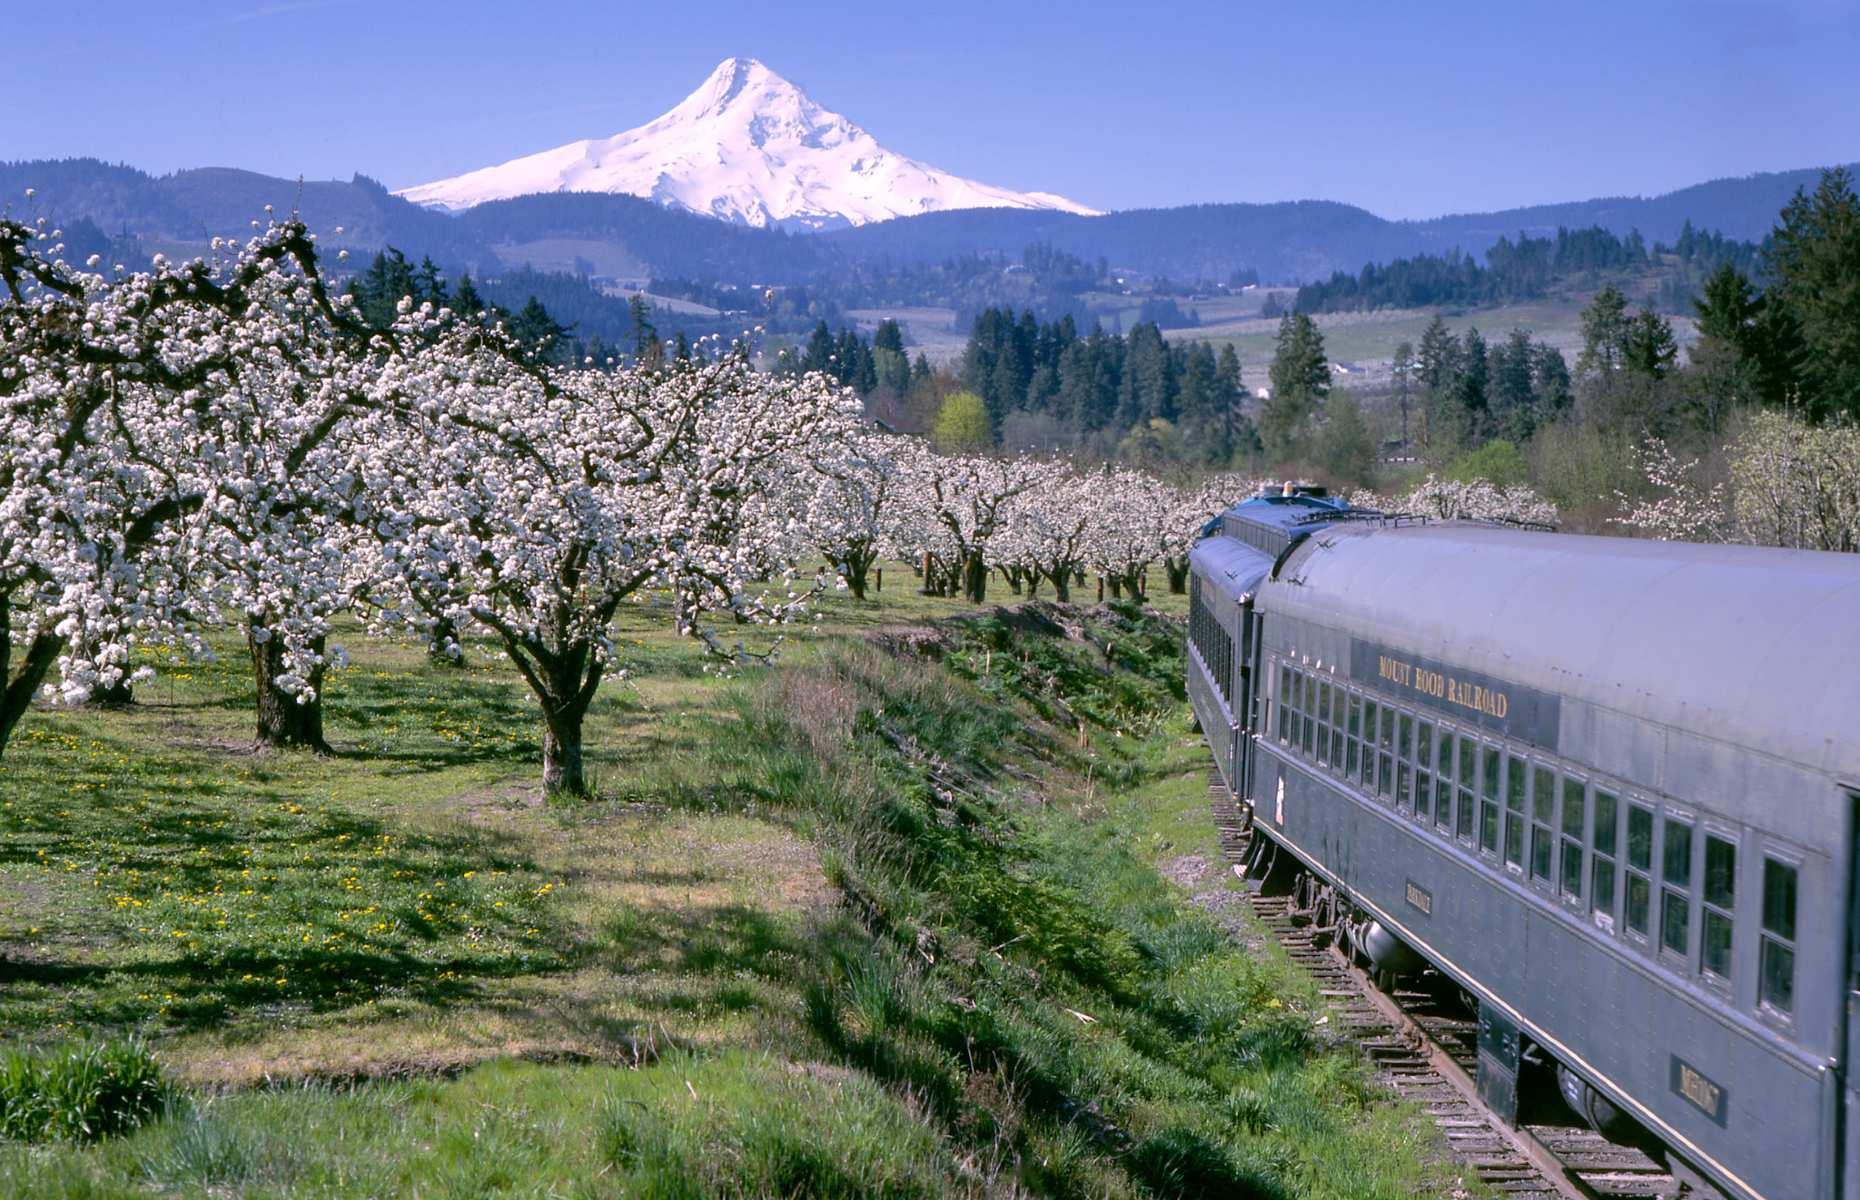 <p>The snow-capped peak, the fluffy tree blossom, the romance of train travel – it could barely be a more inviting scene. Riding the Mount Hood Railroad is a bucket-list experience, starring Oregon's highest point (an active volcano) and the striking valleys of the Columbia River Gorge.</p>  <p>Trips are laid on throughout the year, including special excursions for Christmas, Easter, and Halloween, swinging through woodlands, vineyards, and orchards with Mount Hood and Mount Adams looming above. Hold onto your hat as the train navigates one of only five switchbacks remaining in the US.</p>